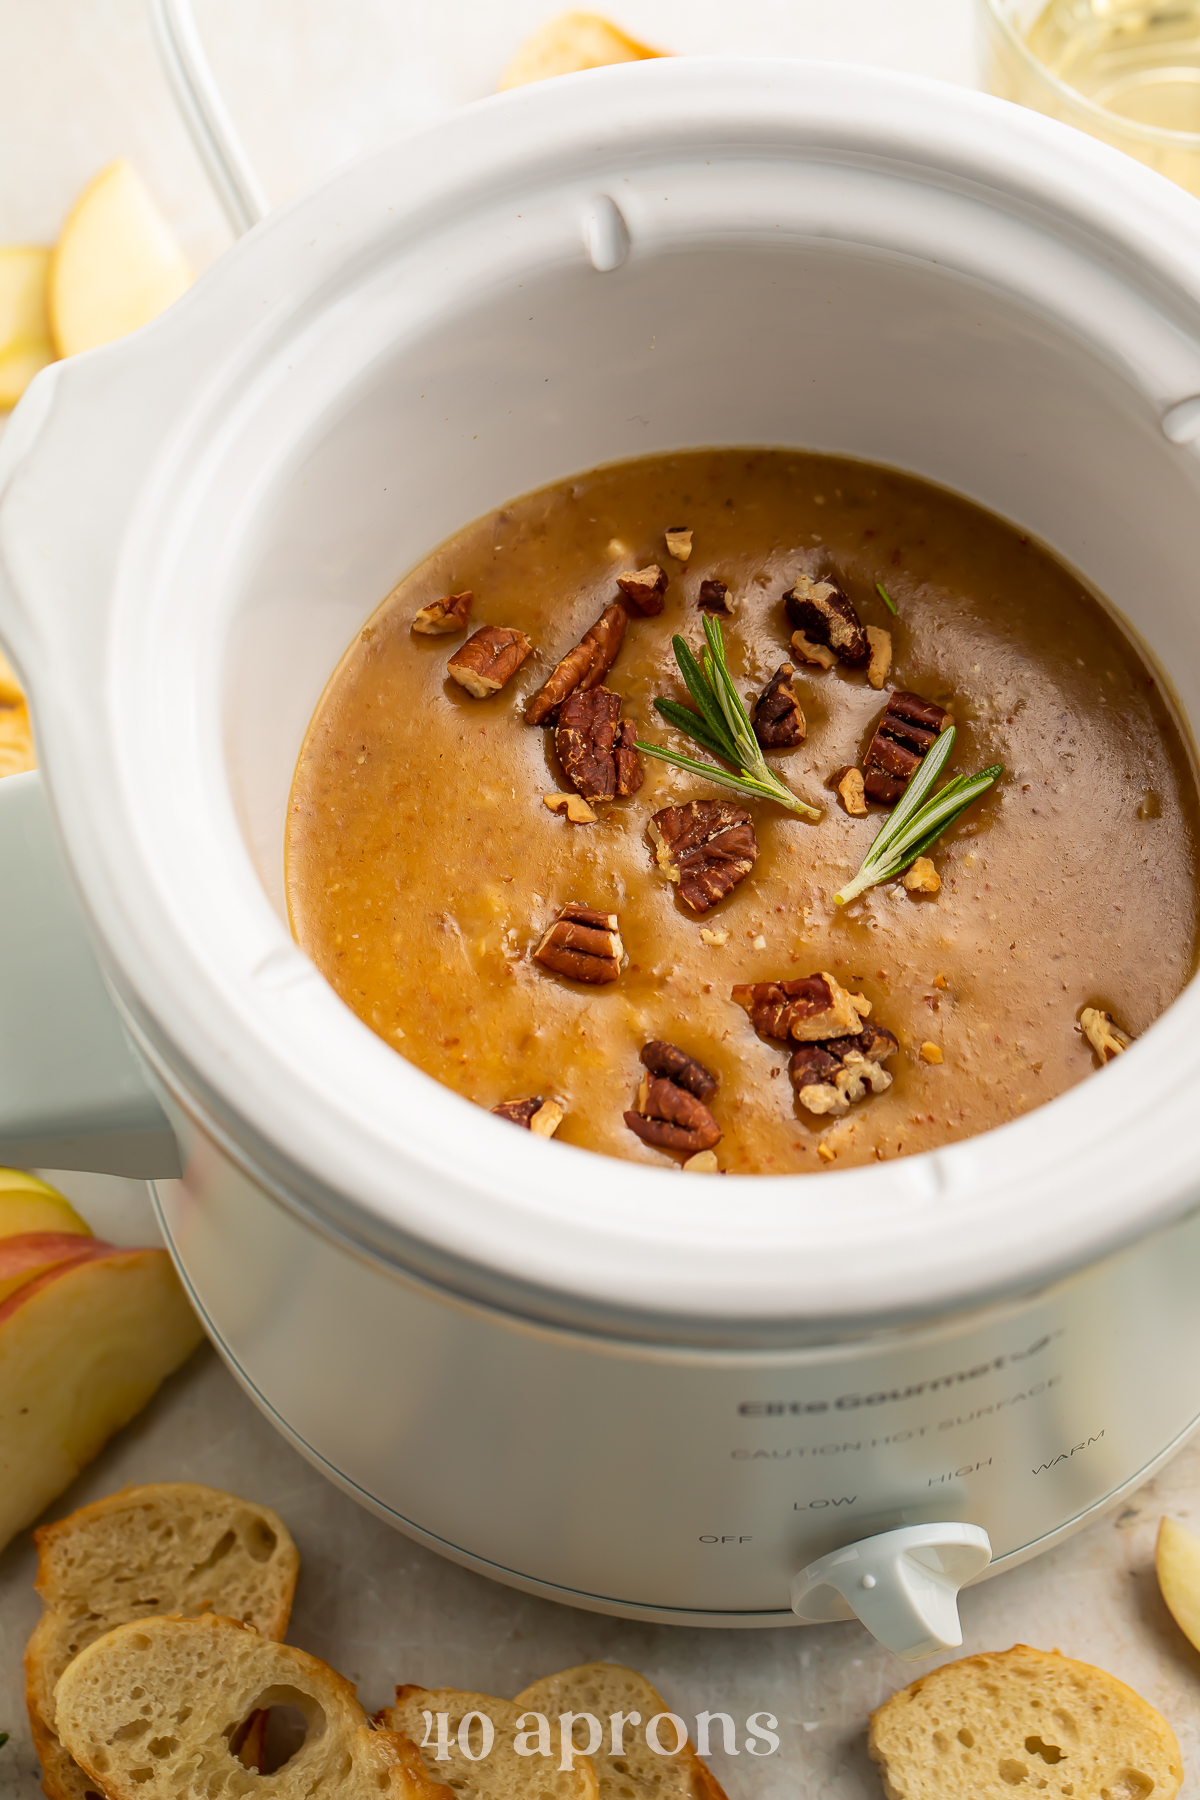 Overhead, angled view of a small white Crockpot slow cooker containing a rich, deep orange baked brie dip topped with pecans and figs.